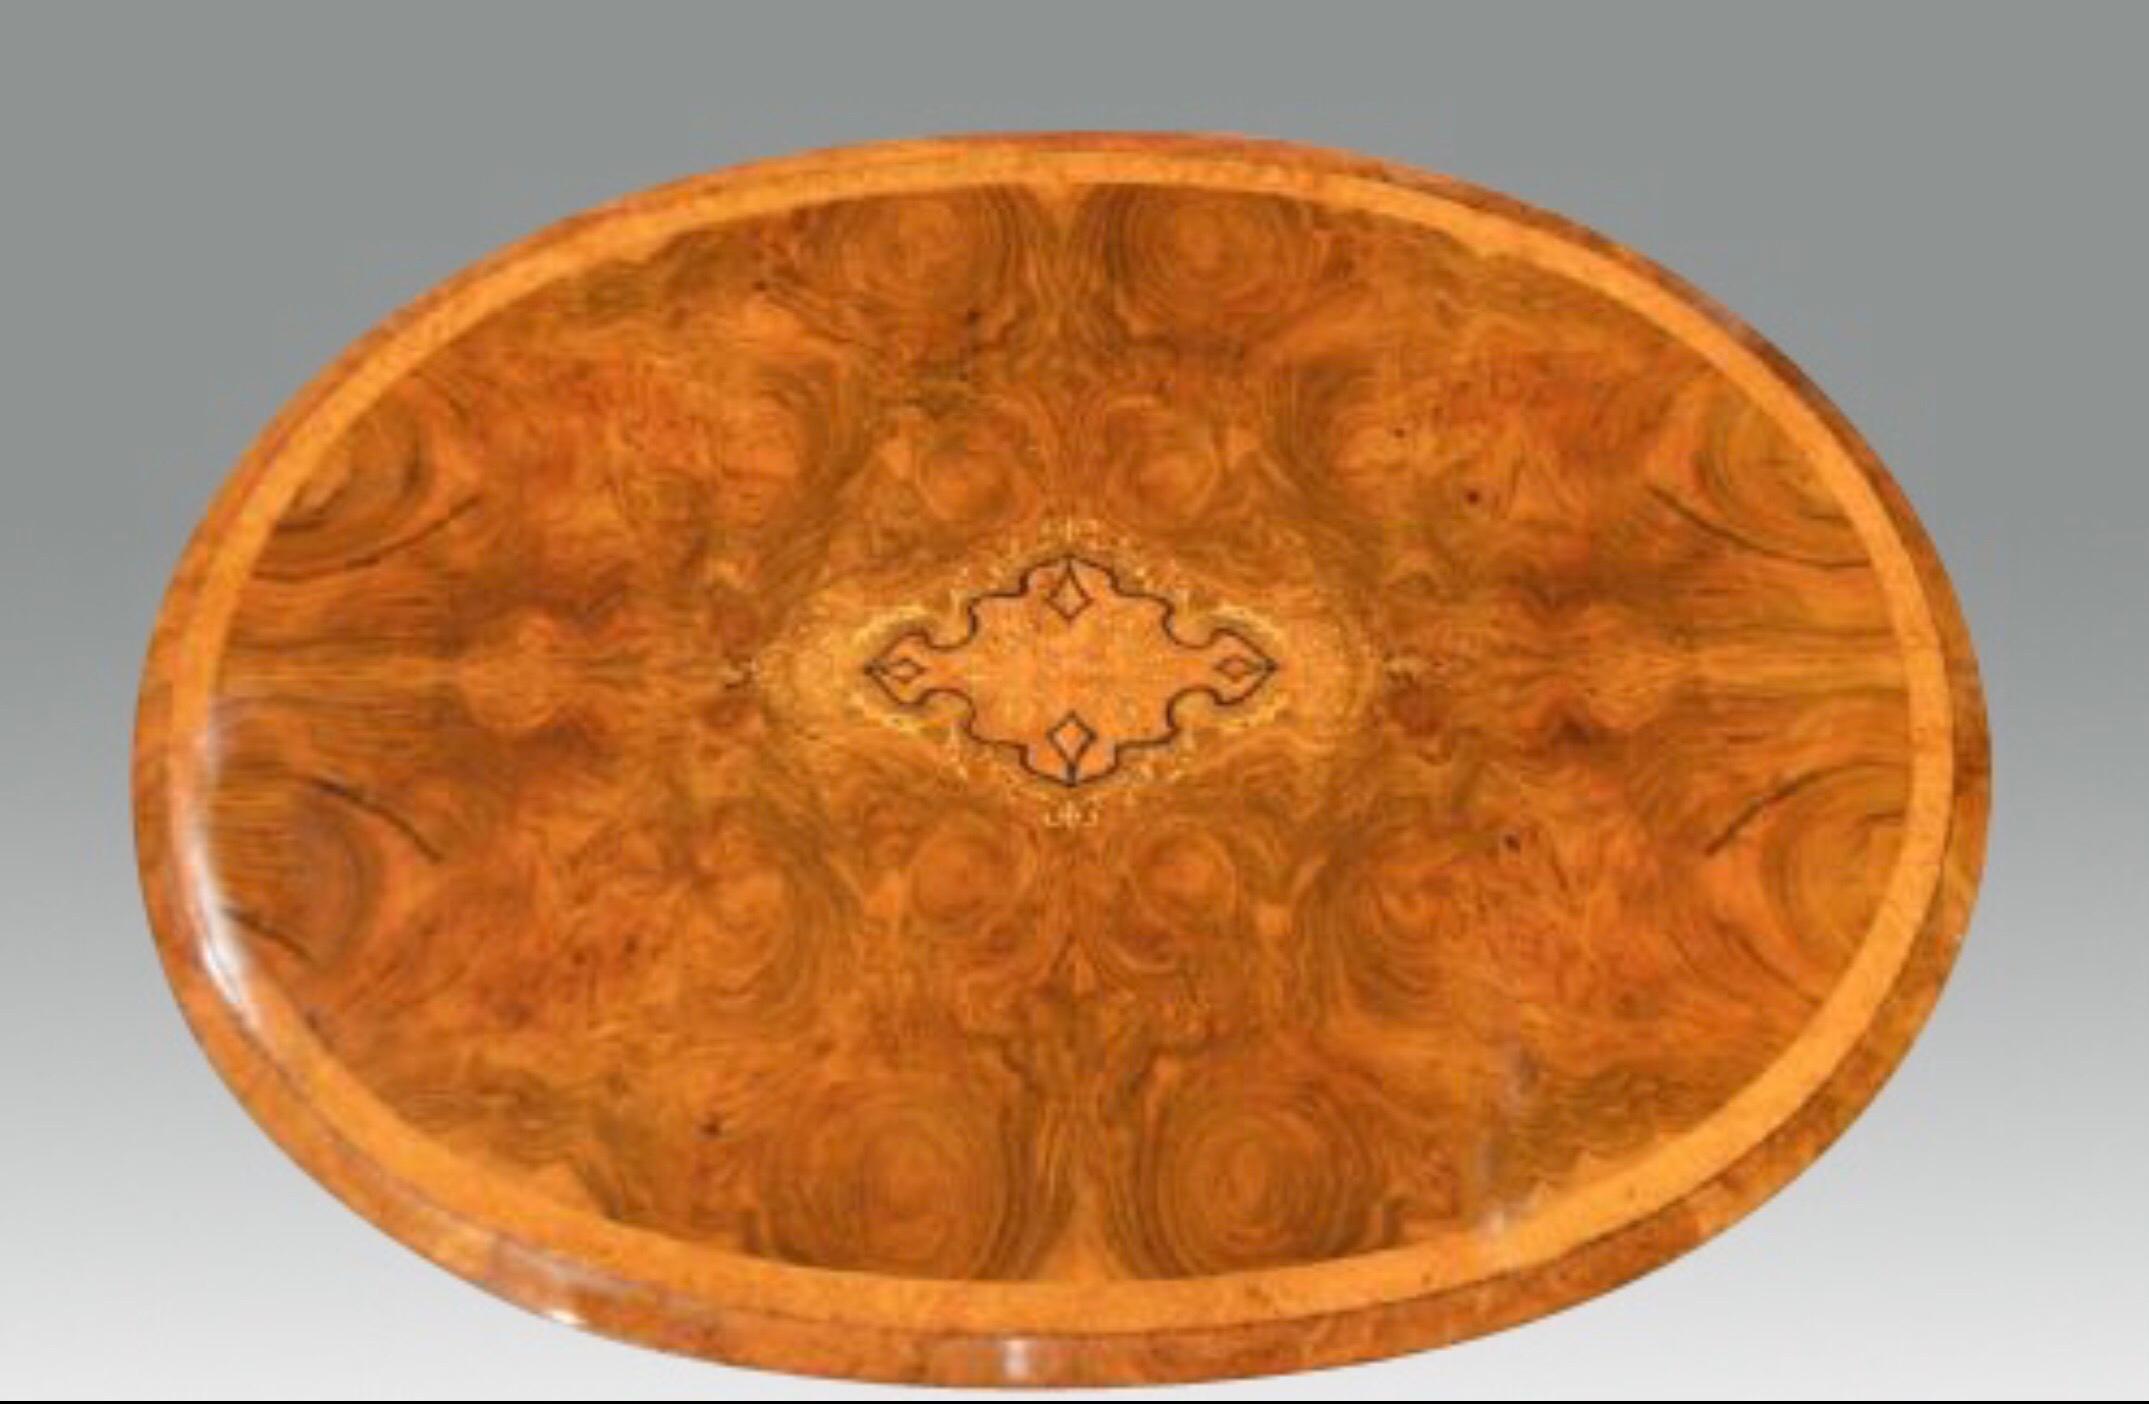 A beautiful burr walnut, amboyna and marquetry inlaid Victorian Period lamp table. The oval top veneered in beautifully figured burr walnut with a foliate marquetry inlaid central panel and cross banded in amboyna with a burr walnut moulded edge.